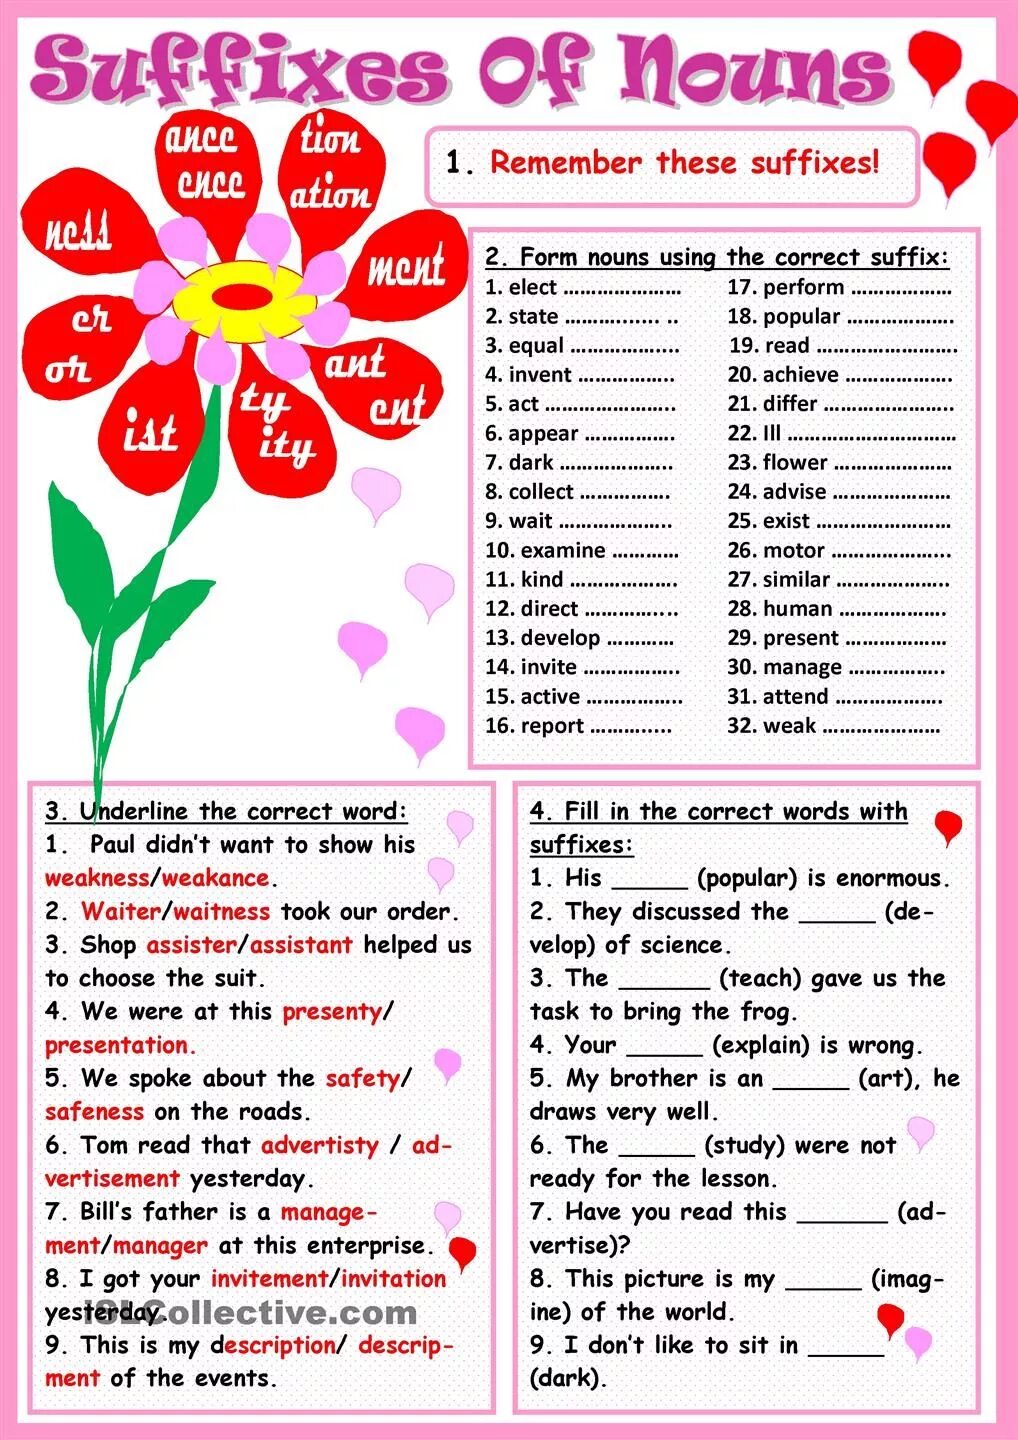 Word formation form noun with the suffixes. Словообразование Worksheets. Словообразование в английском Worksheets. Суффиксы существительных в английском языке Worksheets. Словообразование в английском языке Worksheets.